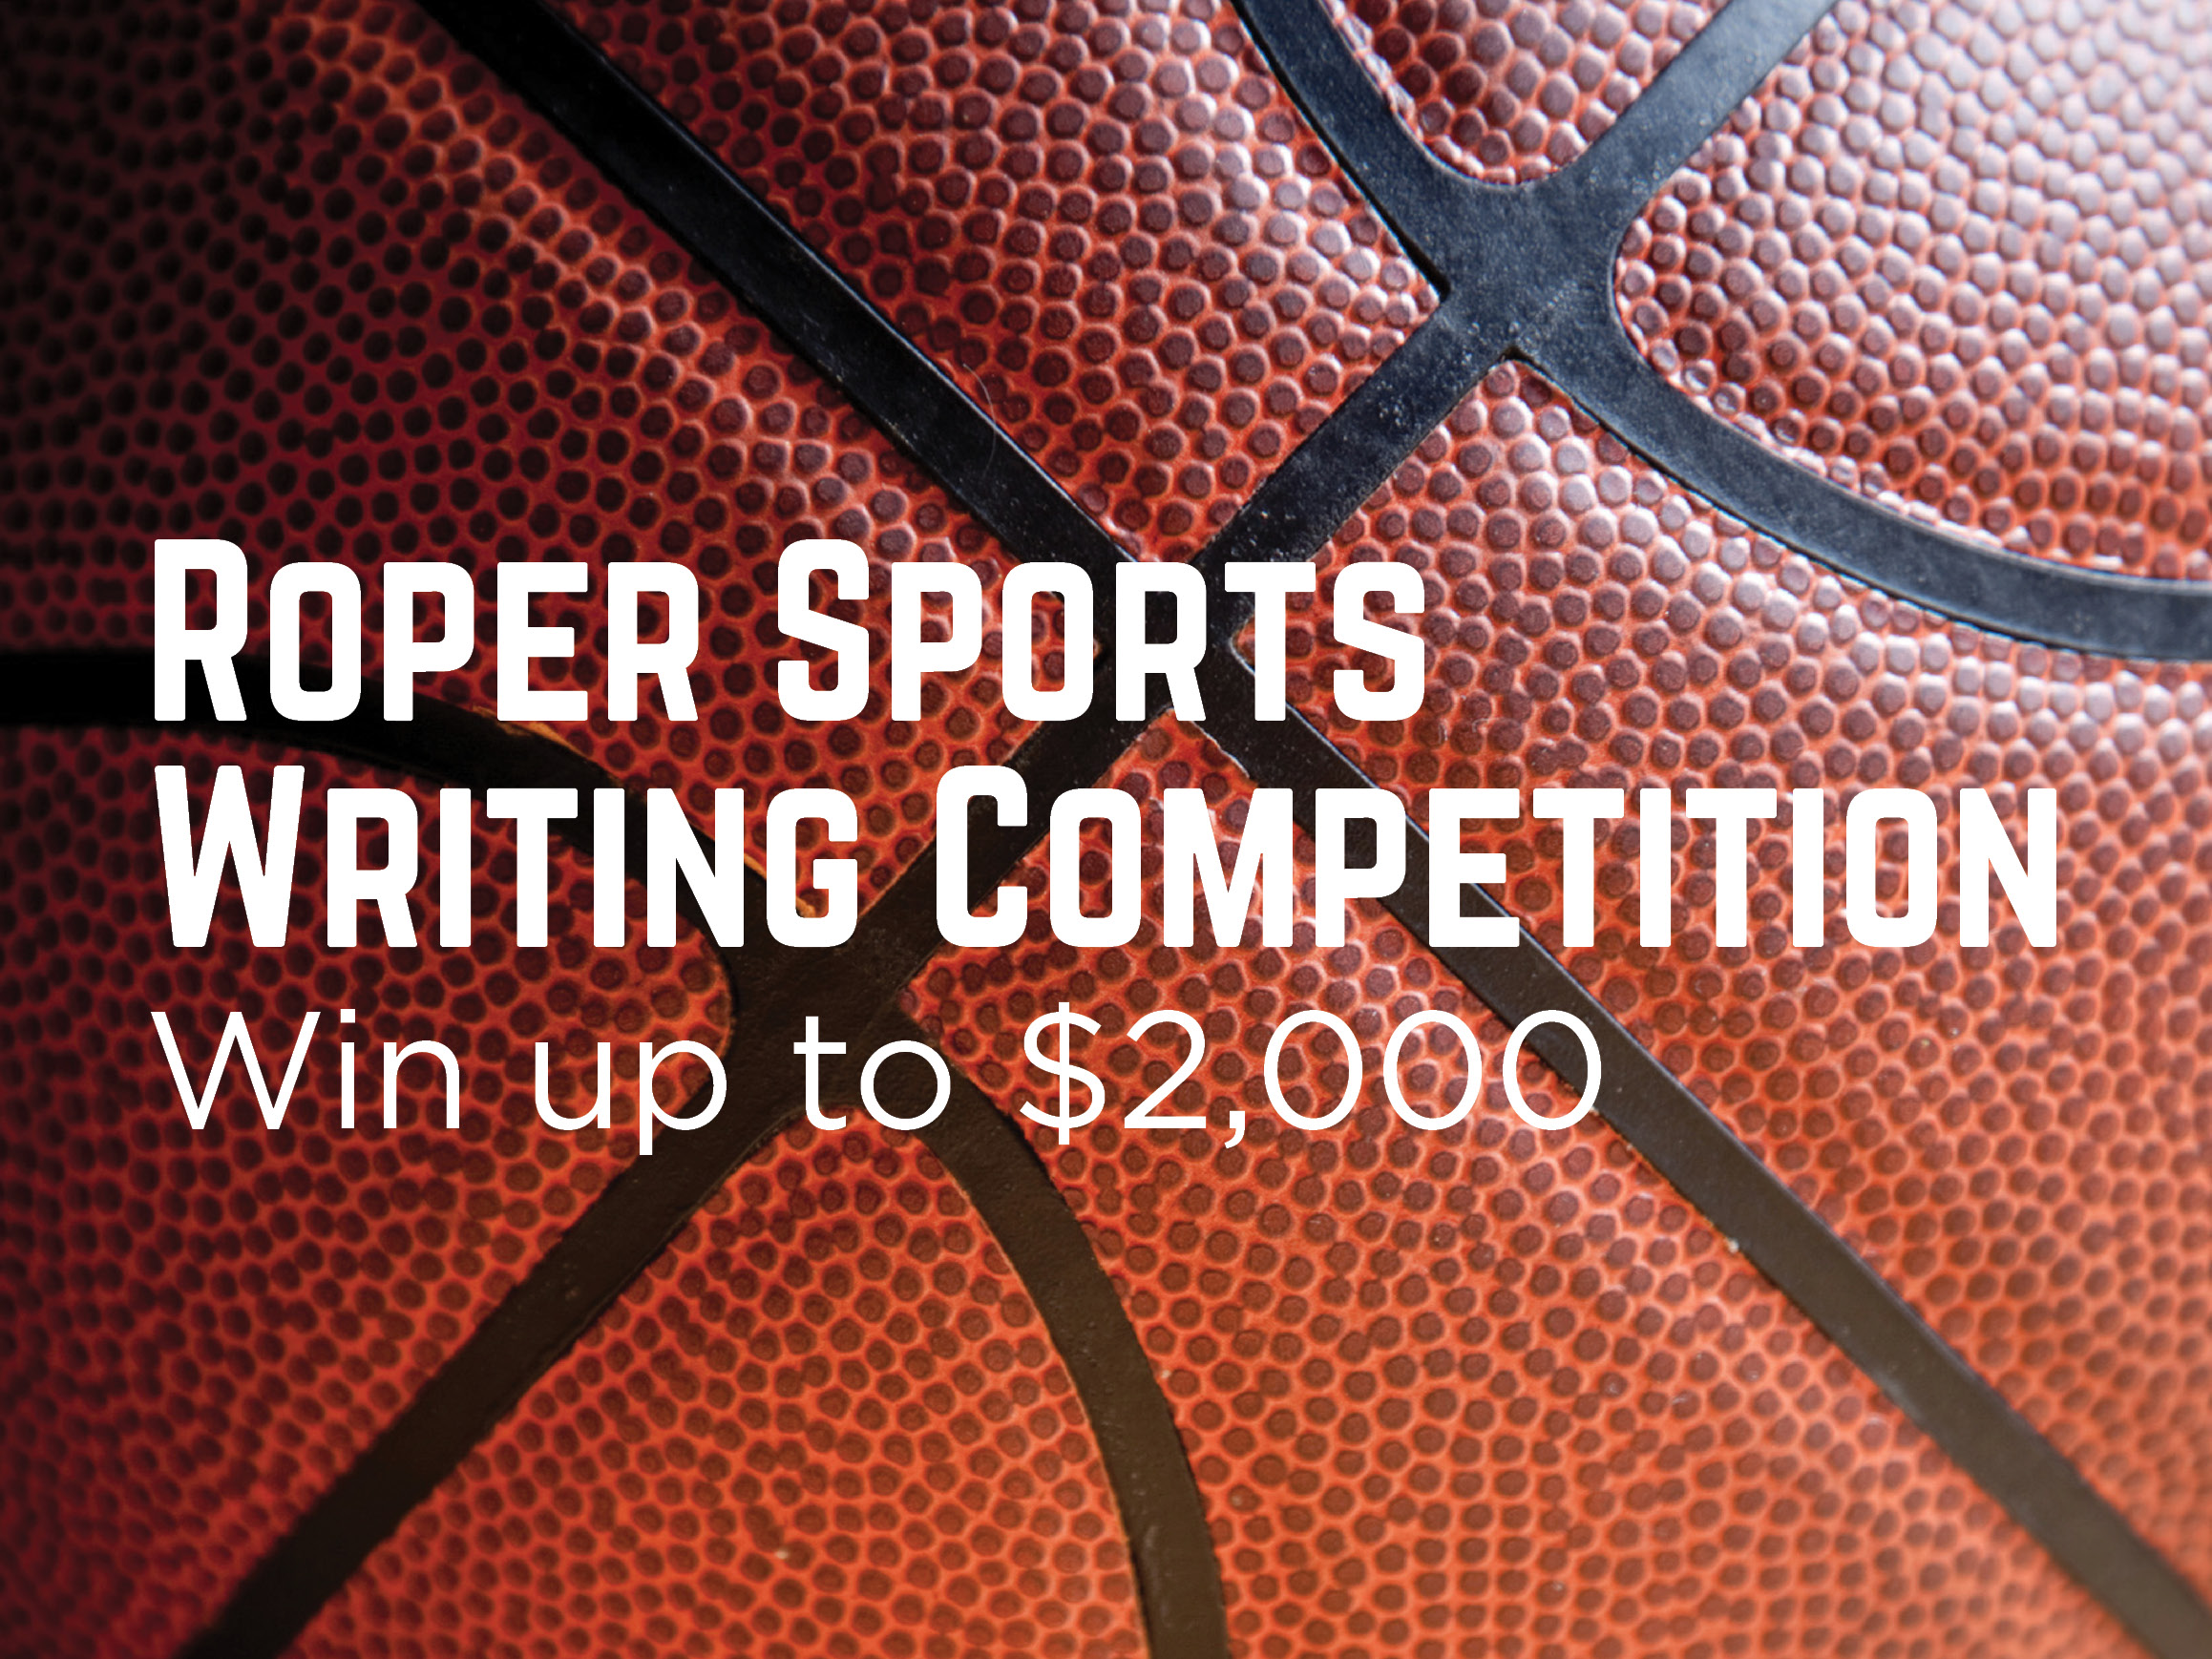 Enter the Roper Sports Writing Competition Announce University of